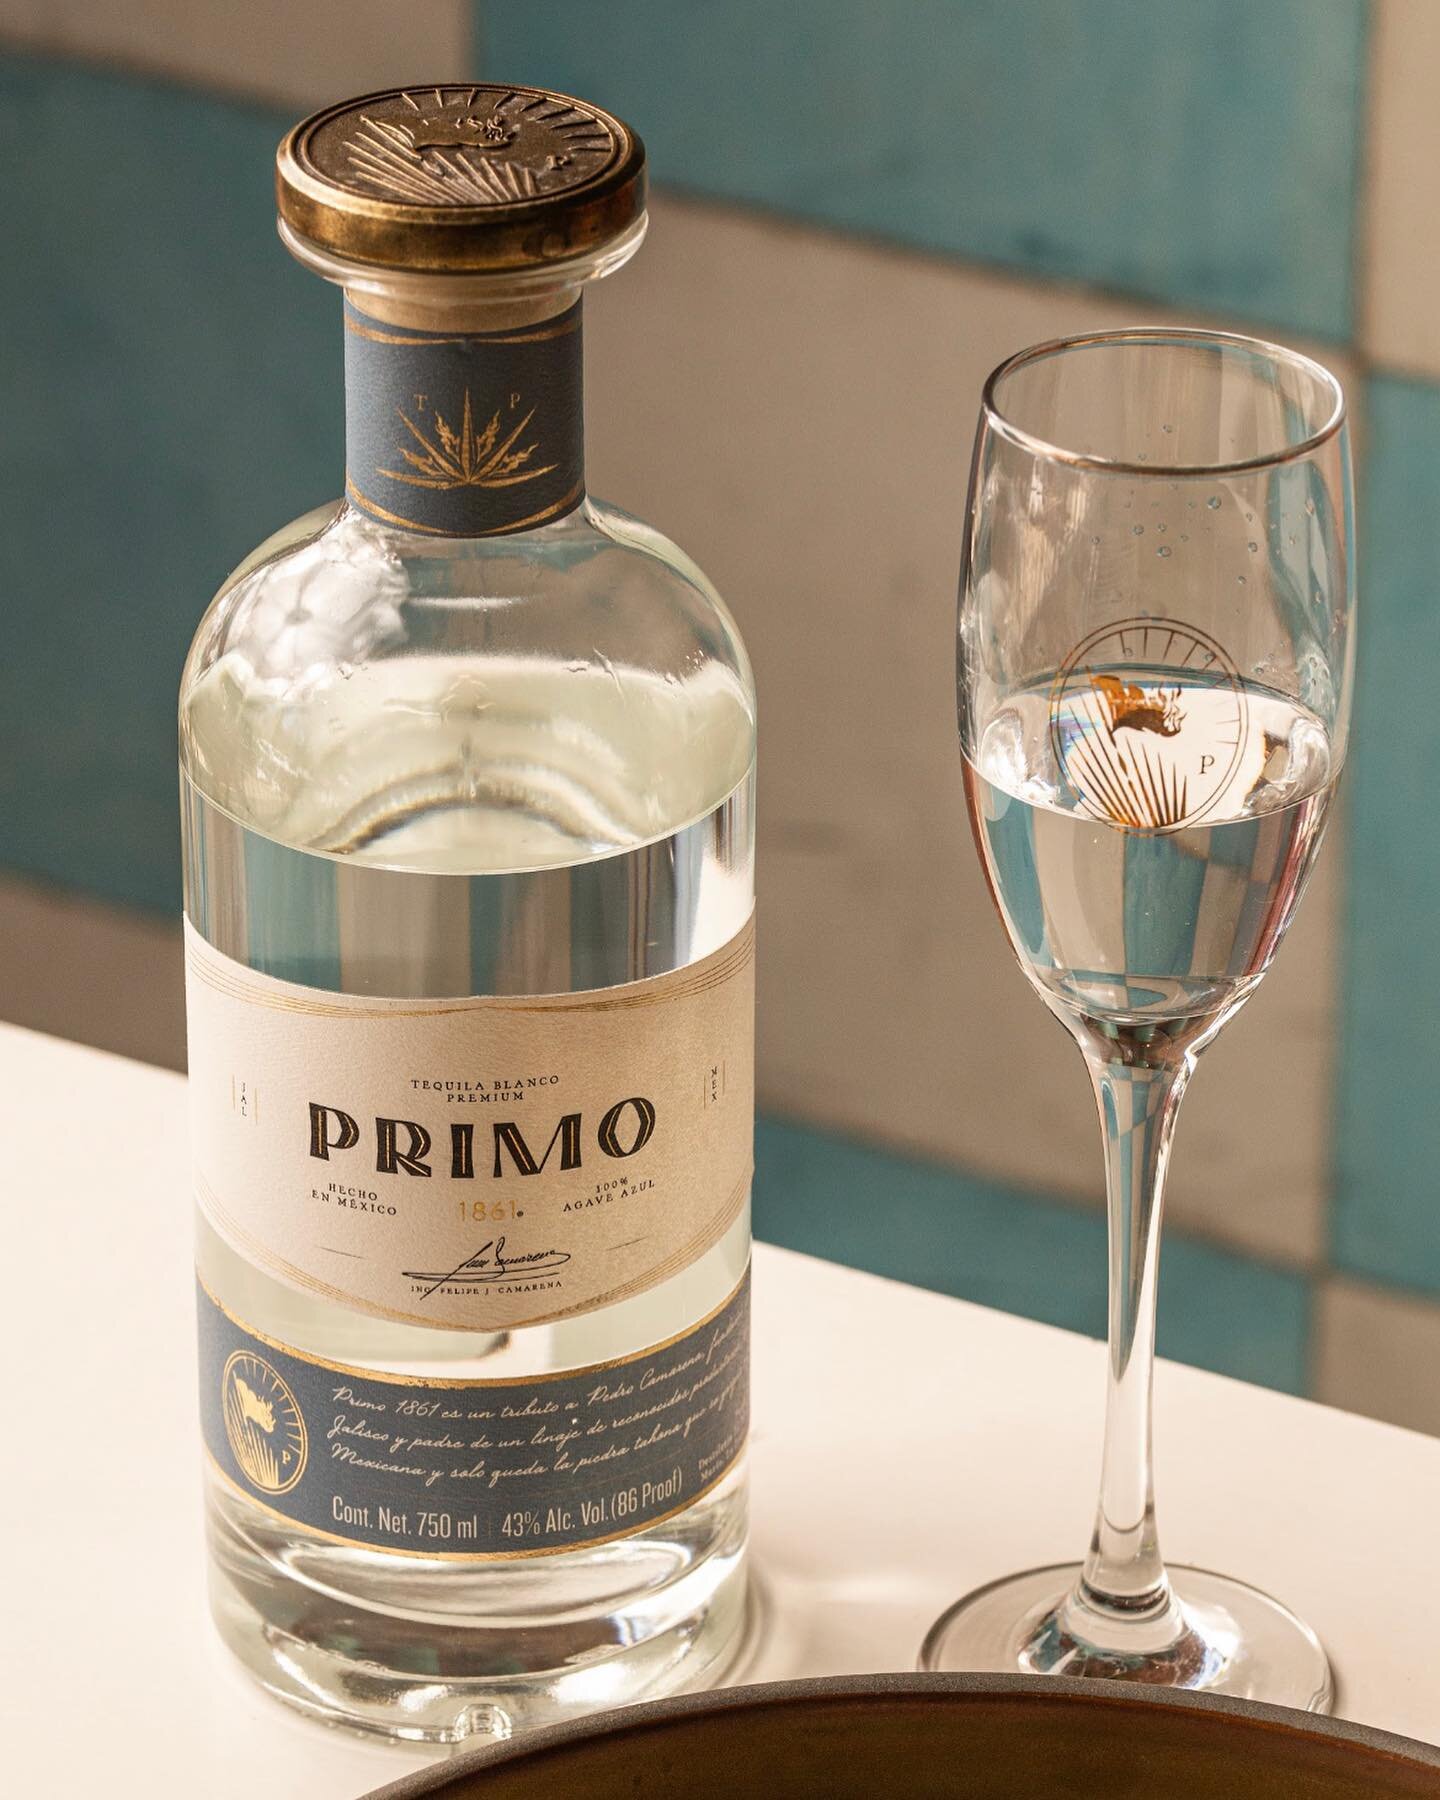 Real tequila is also enjoyed in sips.
Say no to salt and lemon and discover what is special about each PRIMO experience.

Click on the link in the bio and find out where to buy PRIMO near you.
-
El tequila real tambi&eacute;n se disfruta  a sorbos.
D